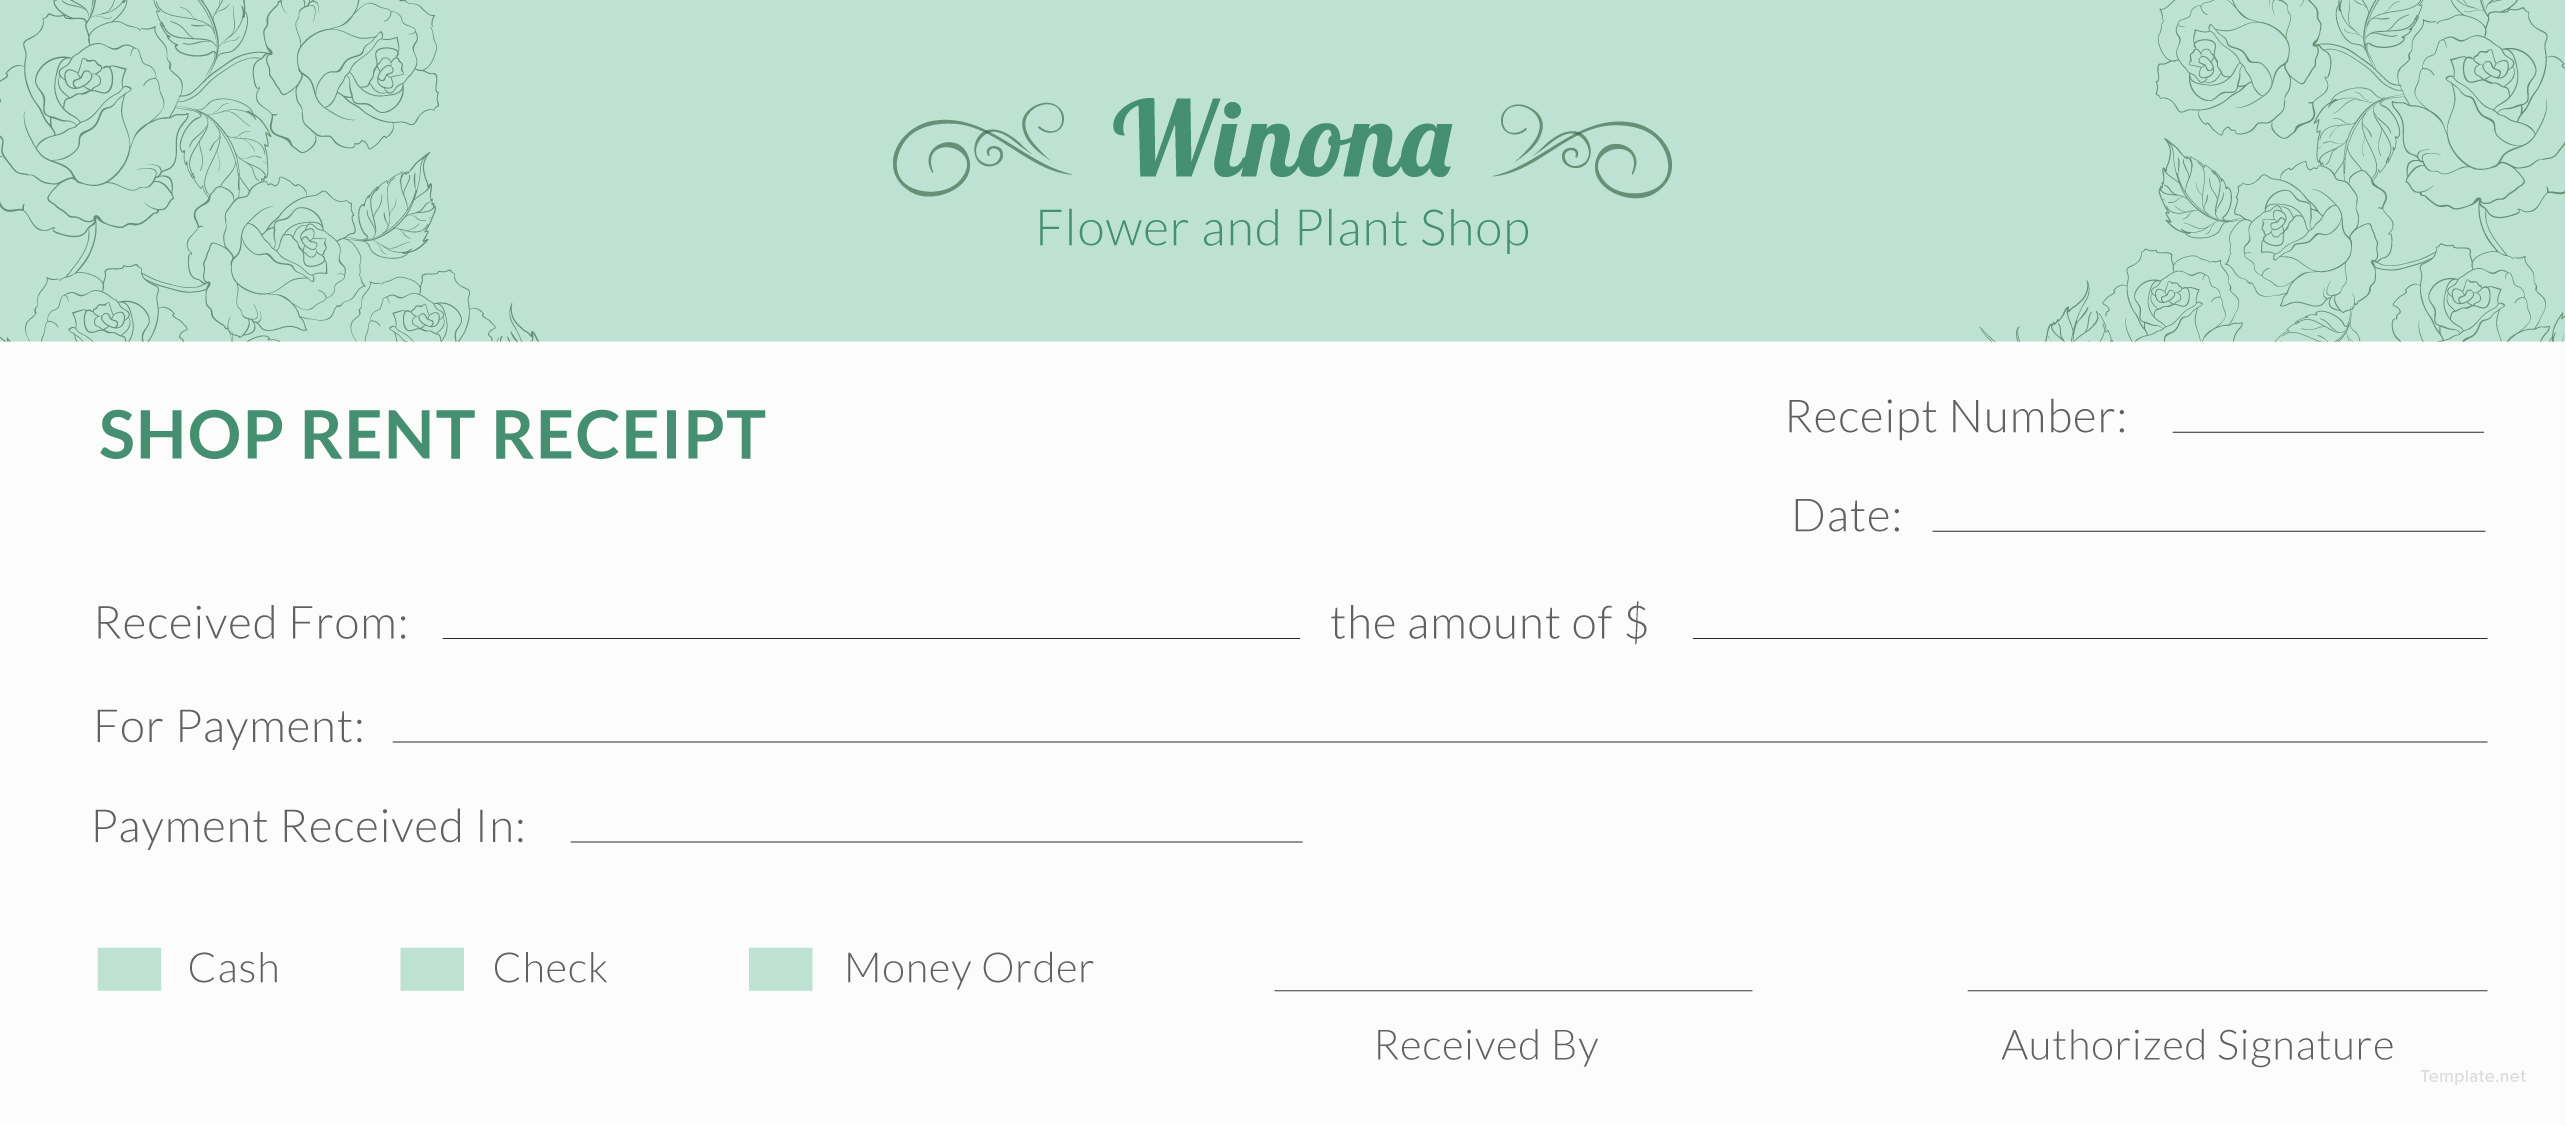 Free Shop Rent Receipt Template In Adobe Illustrator Microsoft Word Excel Apple Pages